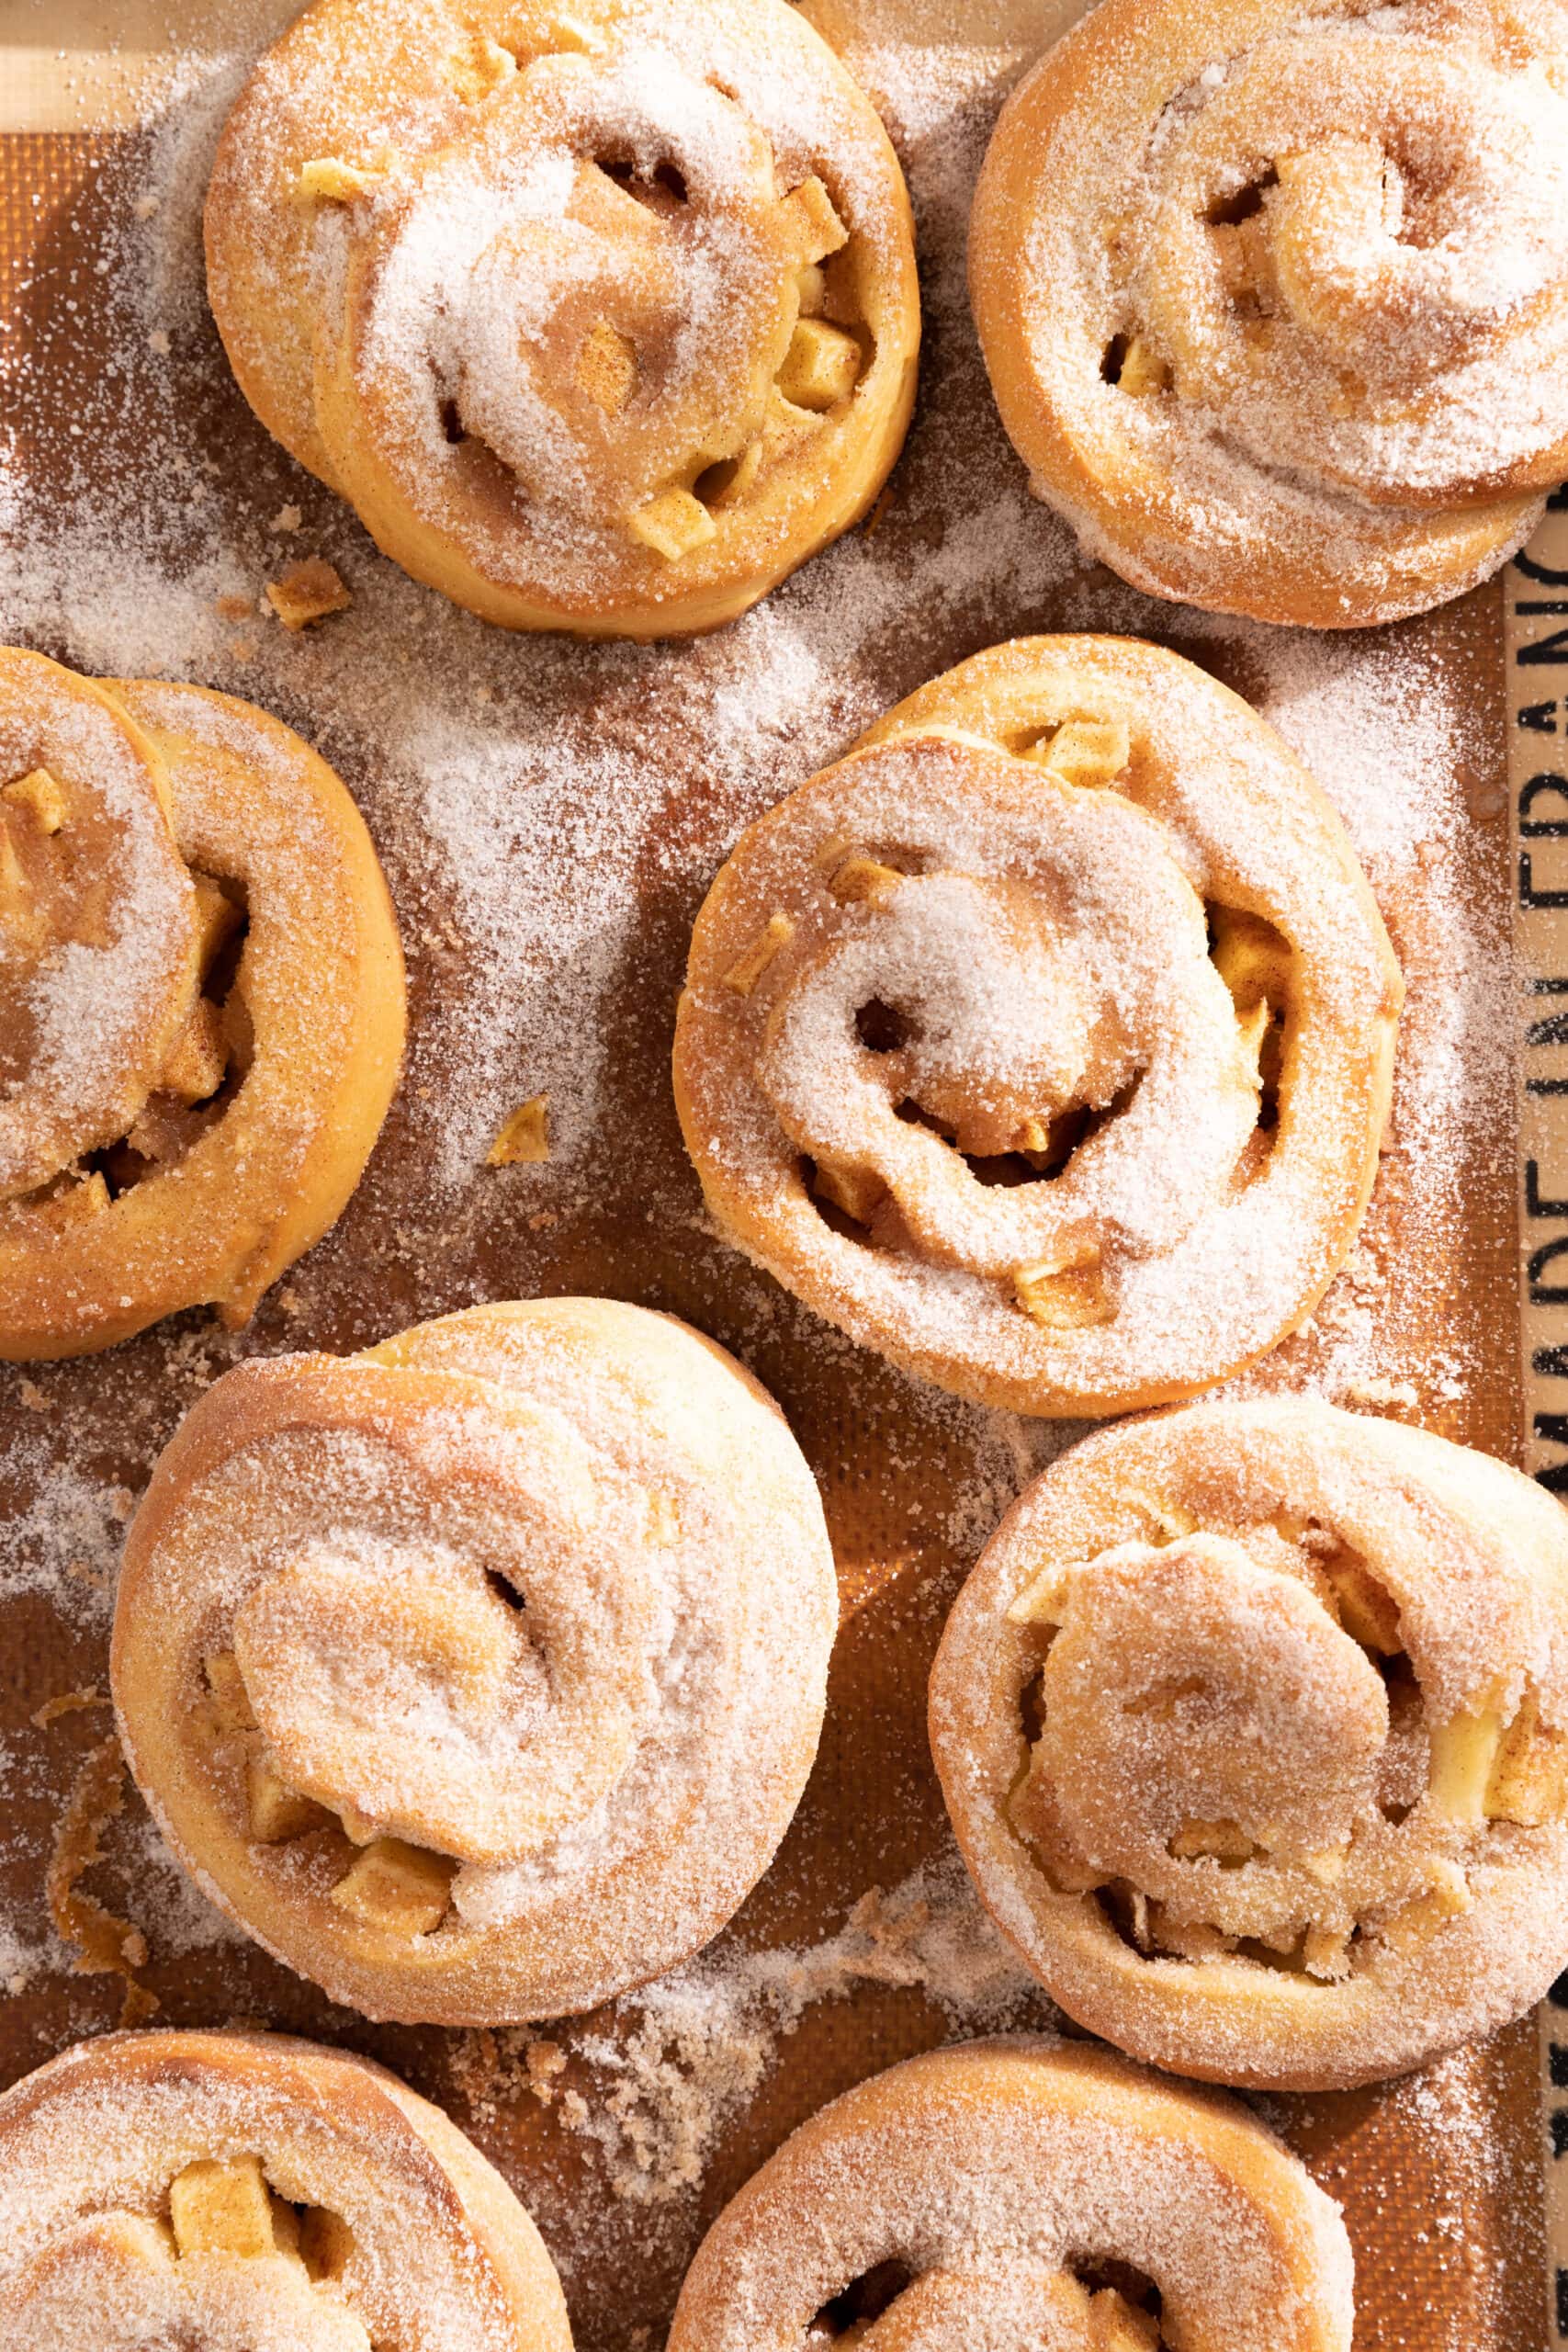 Overhead view of freshly baked apple cinnamon rolls on a silicone baking mat topped with cinnamon sugar.